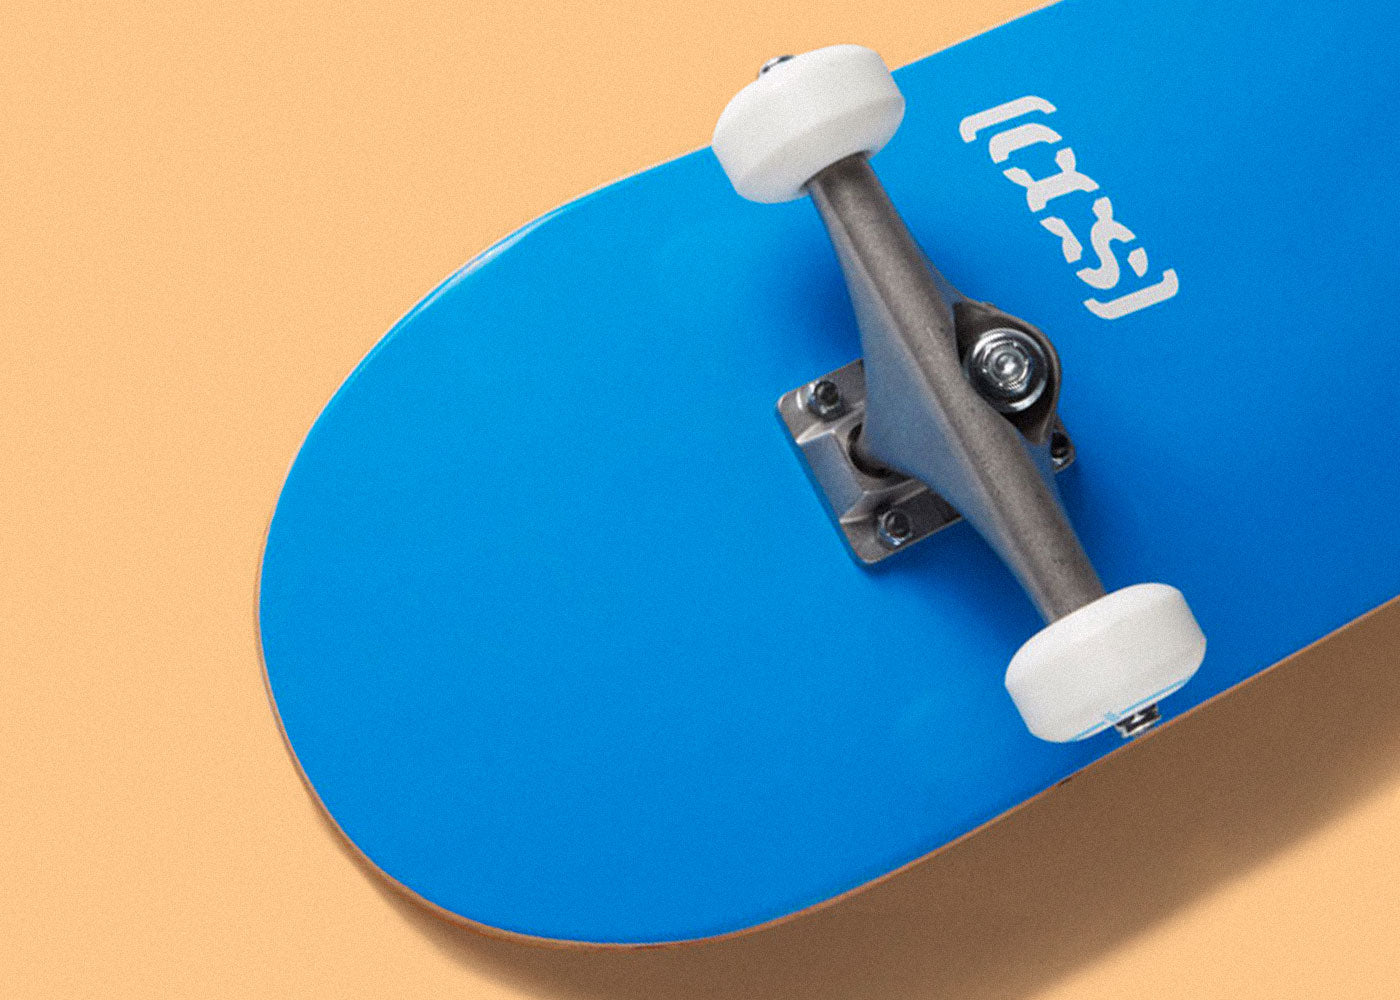 Getting Quality Skateboards for Cheap - CCS